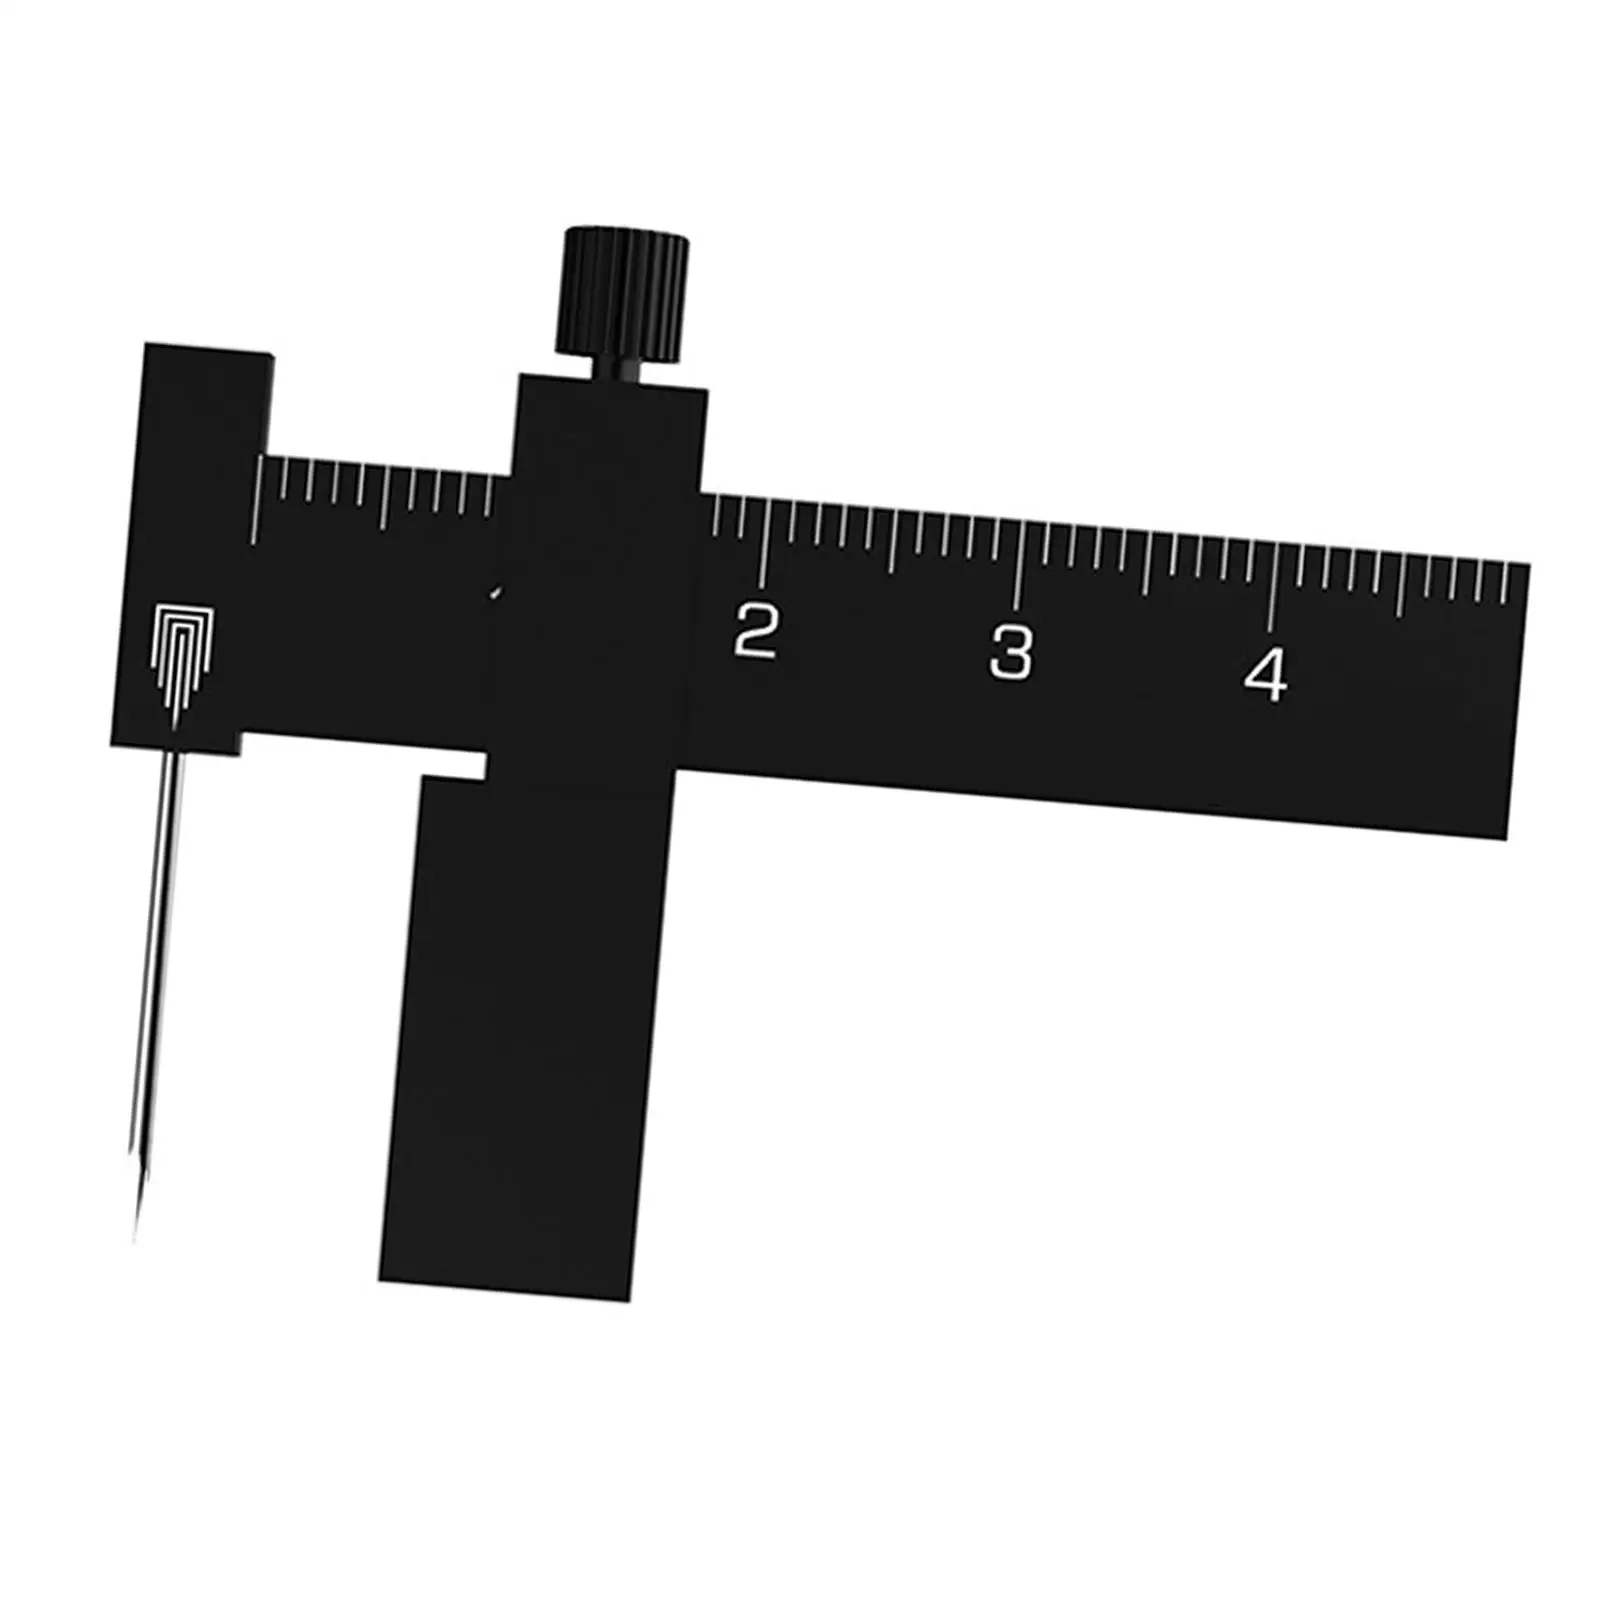 Equidistant Parallel Scriber T14A02 T14A03 Carving Ruler Accurate Measurement Scribing Auxiliary Ruler for Crafting Woodworking